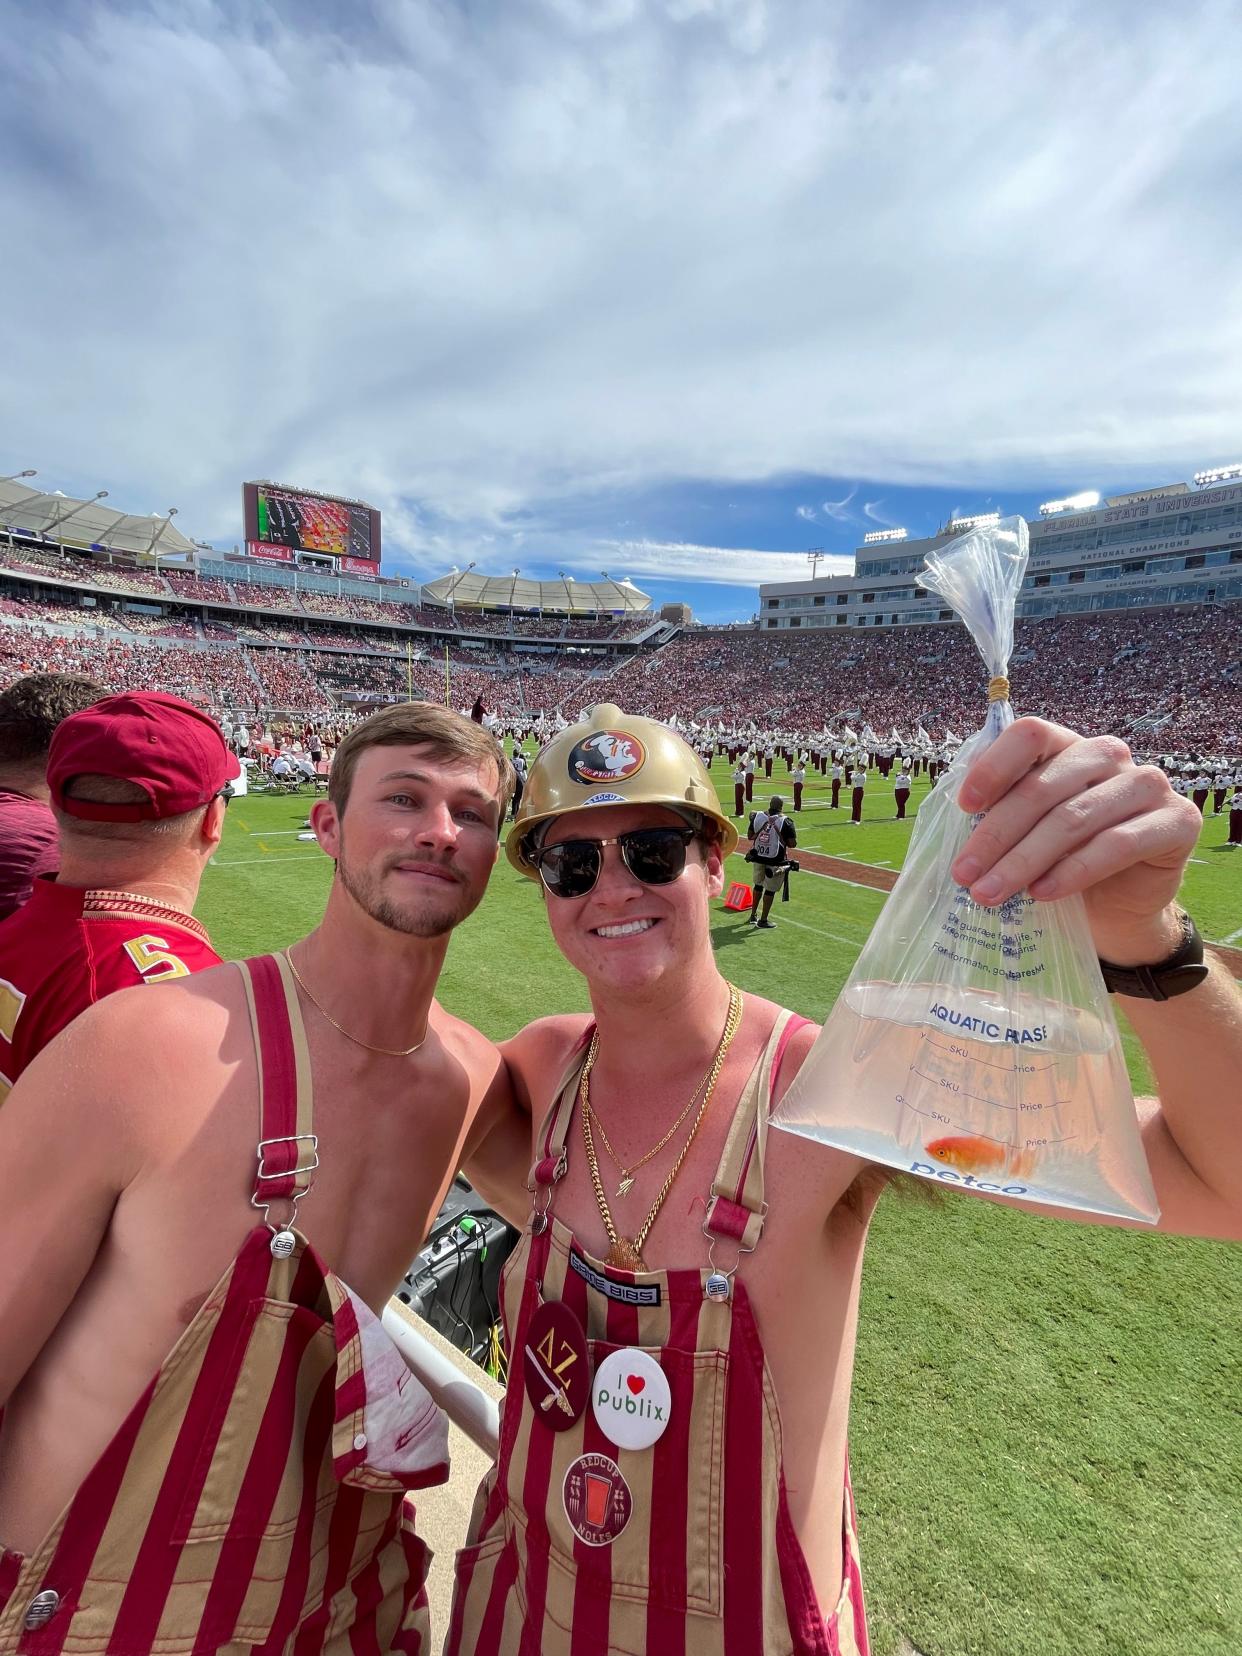 Florida State student junior Jack Henyecz and his pet gold fish, Garnet, have been a main fixture at Florida State home and away football games this season. The fish has been popular amongst fans and even players.